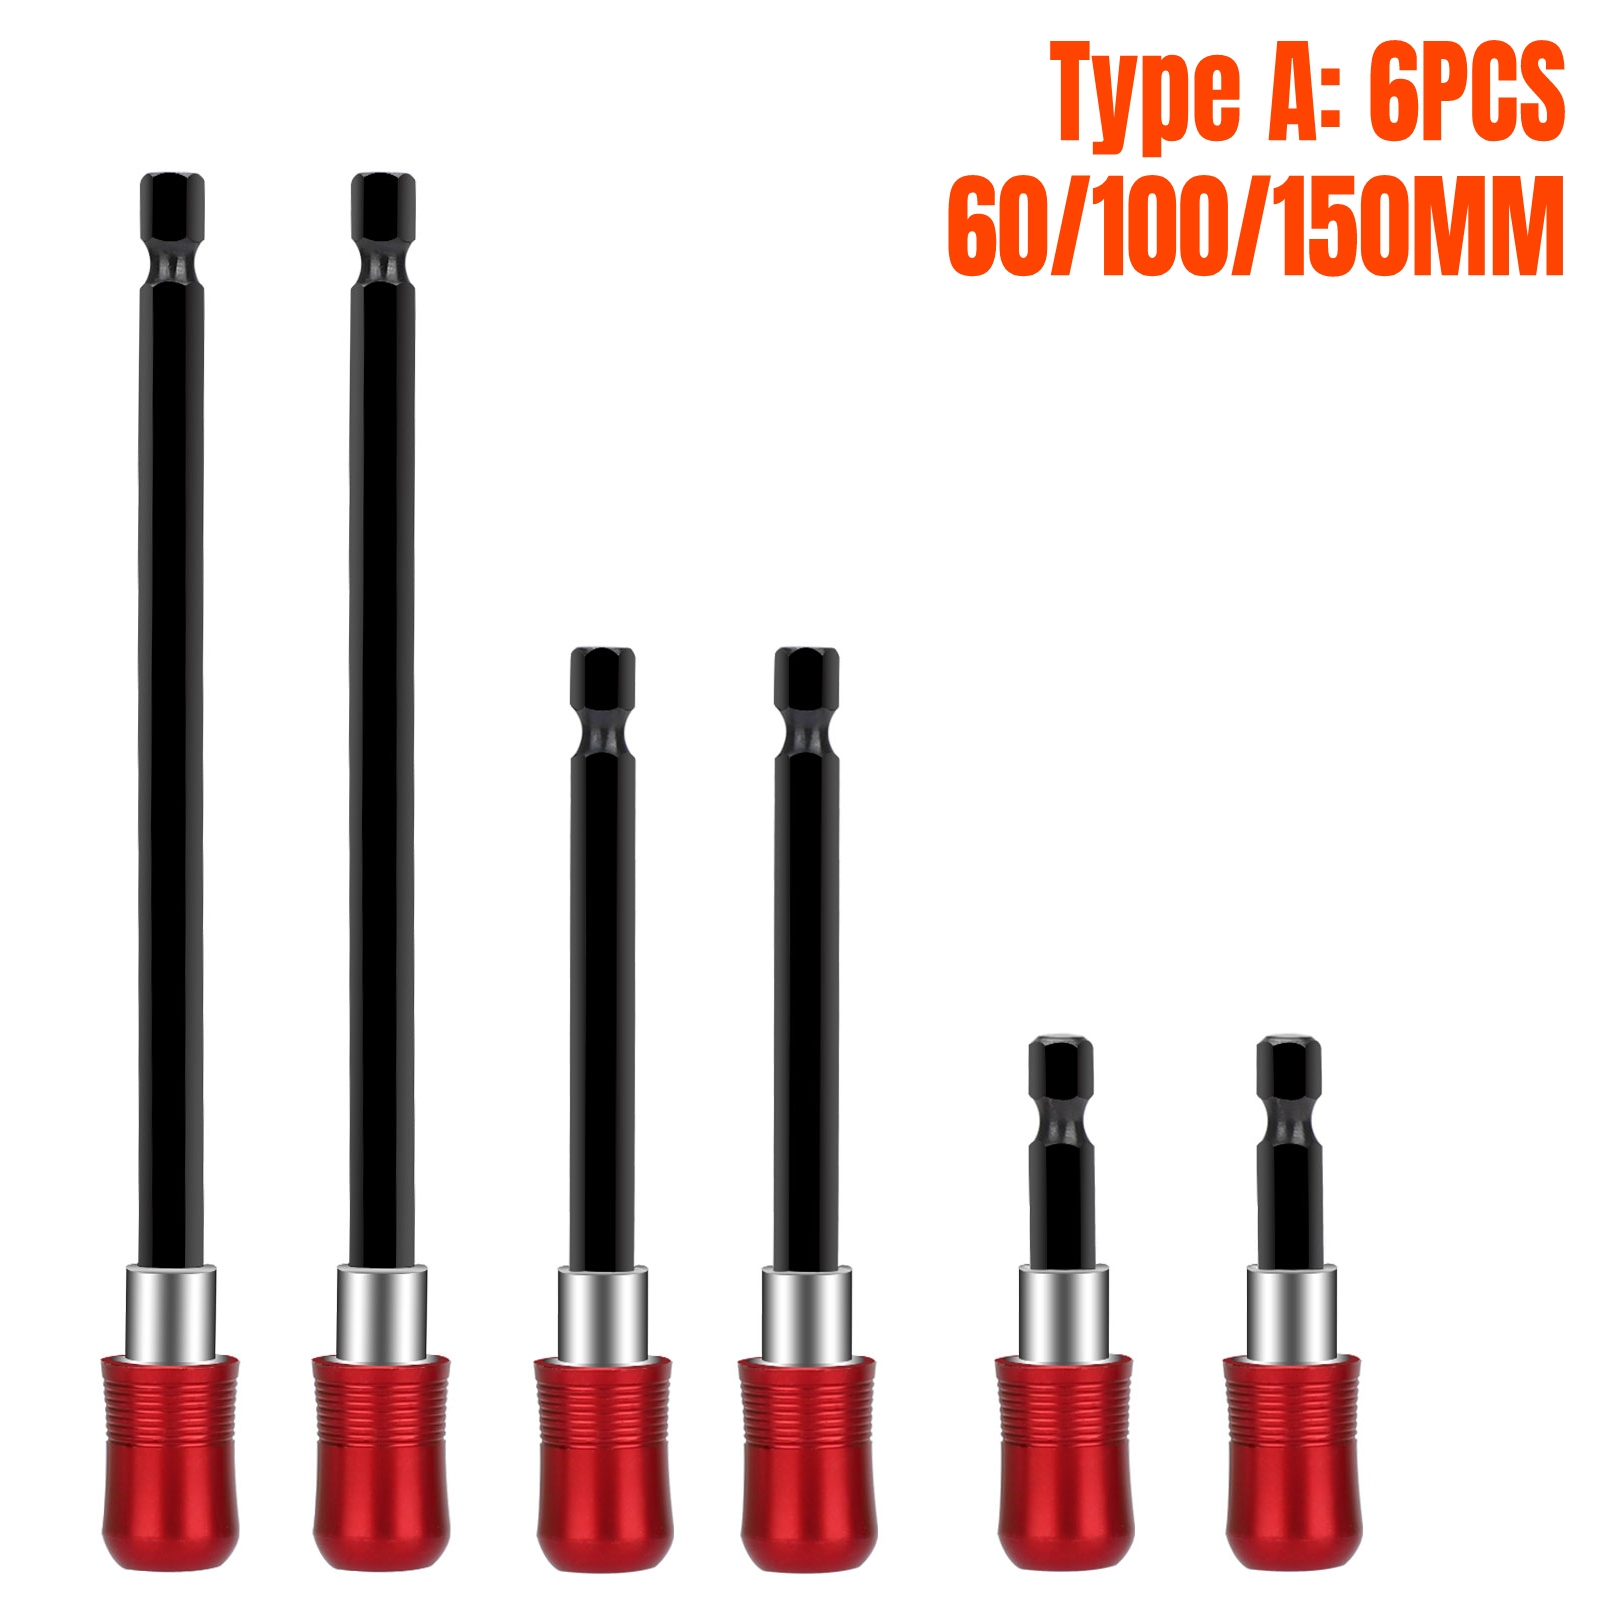 3x Drill Bit 60/100/150mm 1/4 Hex Magnetic Screwdriver Extension Holder Red 